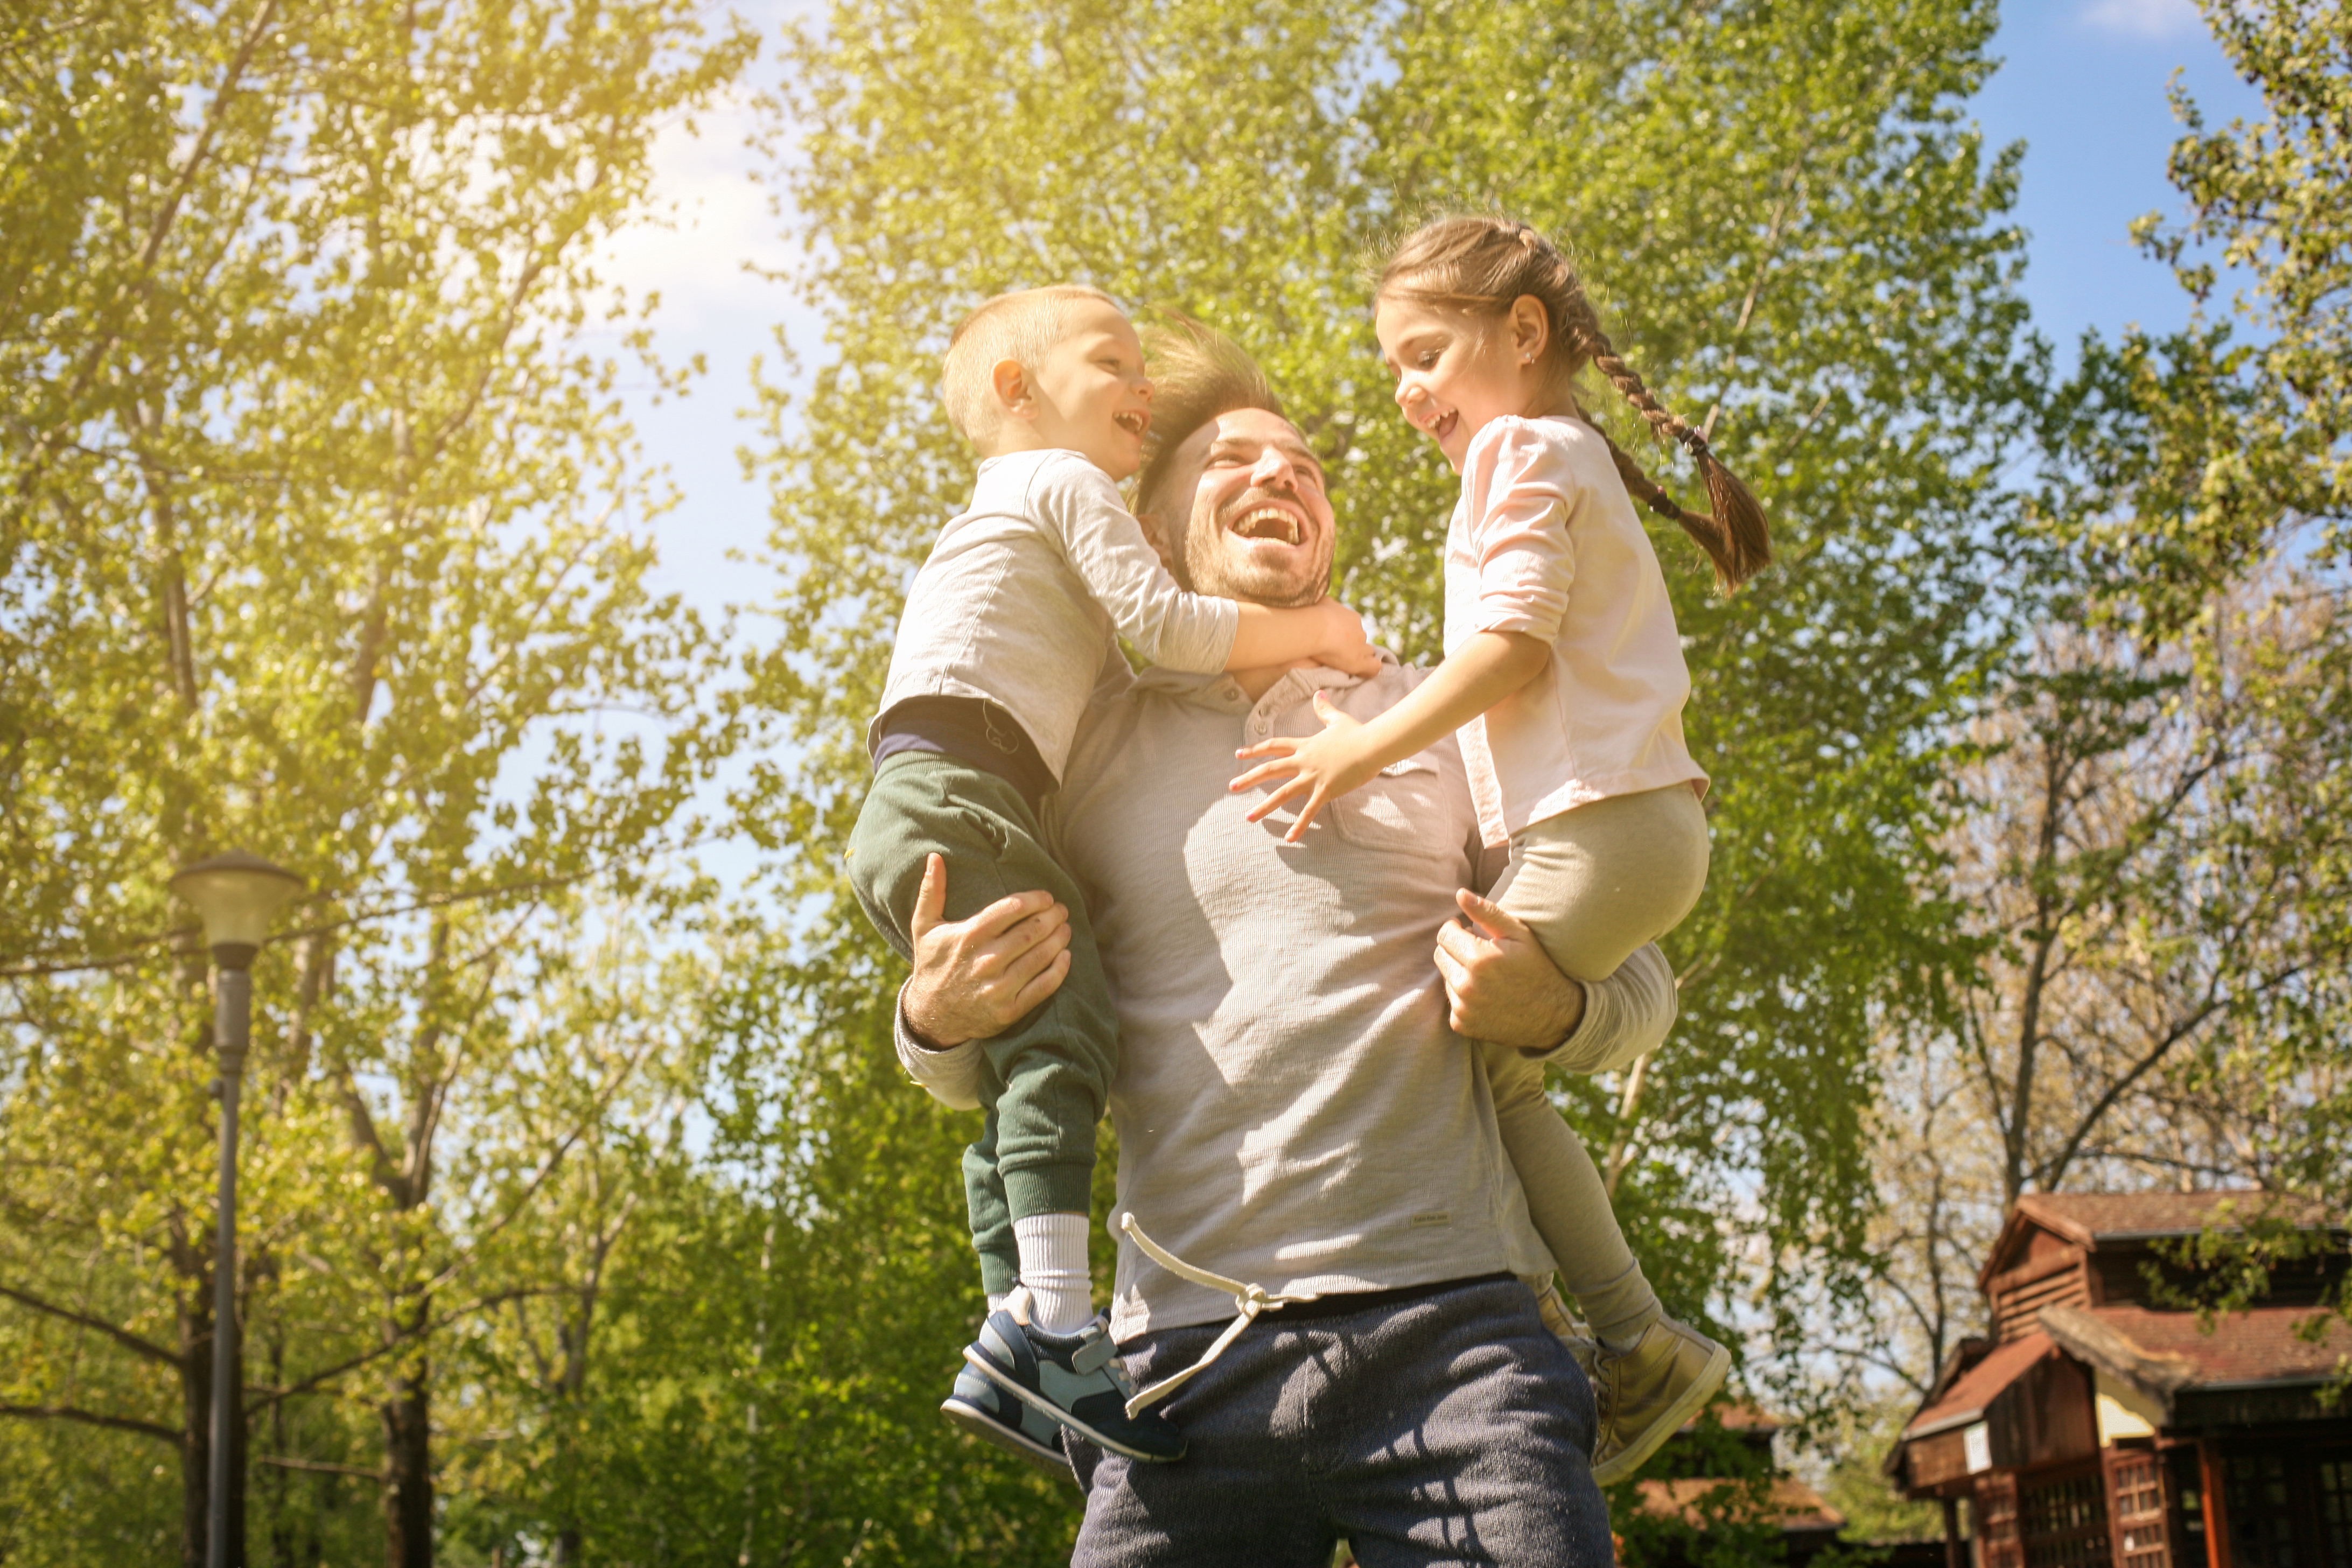 Cheerful father | Source: Shutterstock